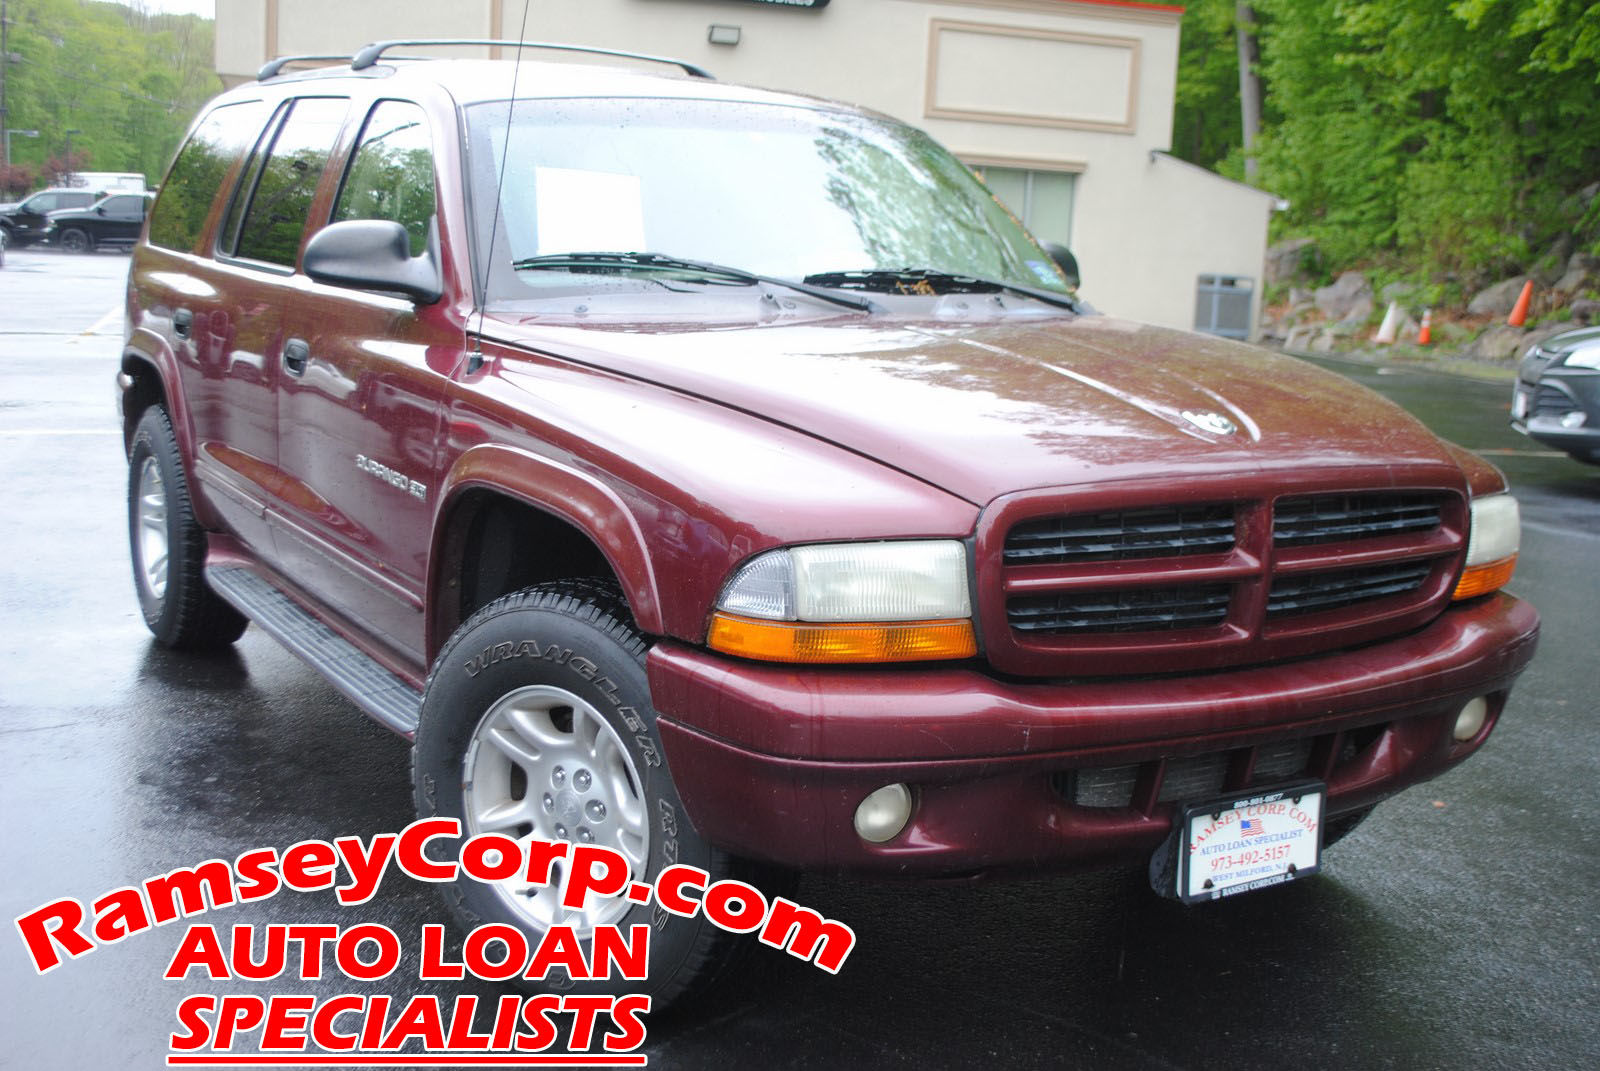 Used 2001 Dodge Durango For Sale at Ramsey Corp. | VIN: 1B4HS28N51F582259